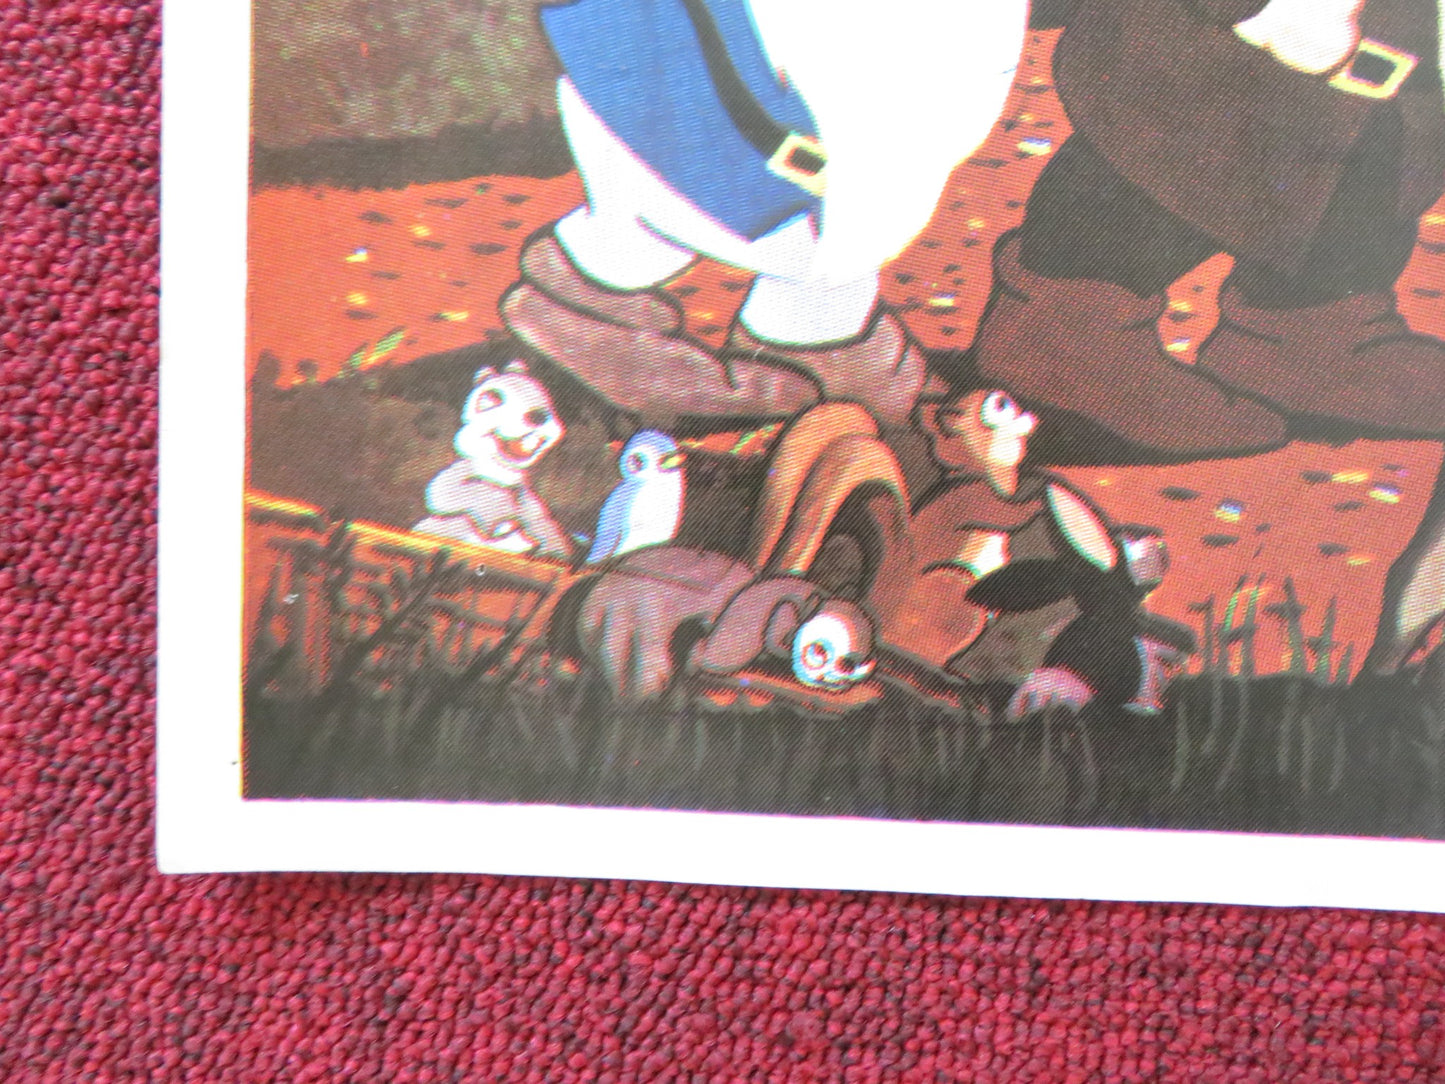 SNOW WHITE AND THE SEVEN DWARFS YUGOSLAVIAN POSTER DISNEY ATWELL R1970S